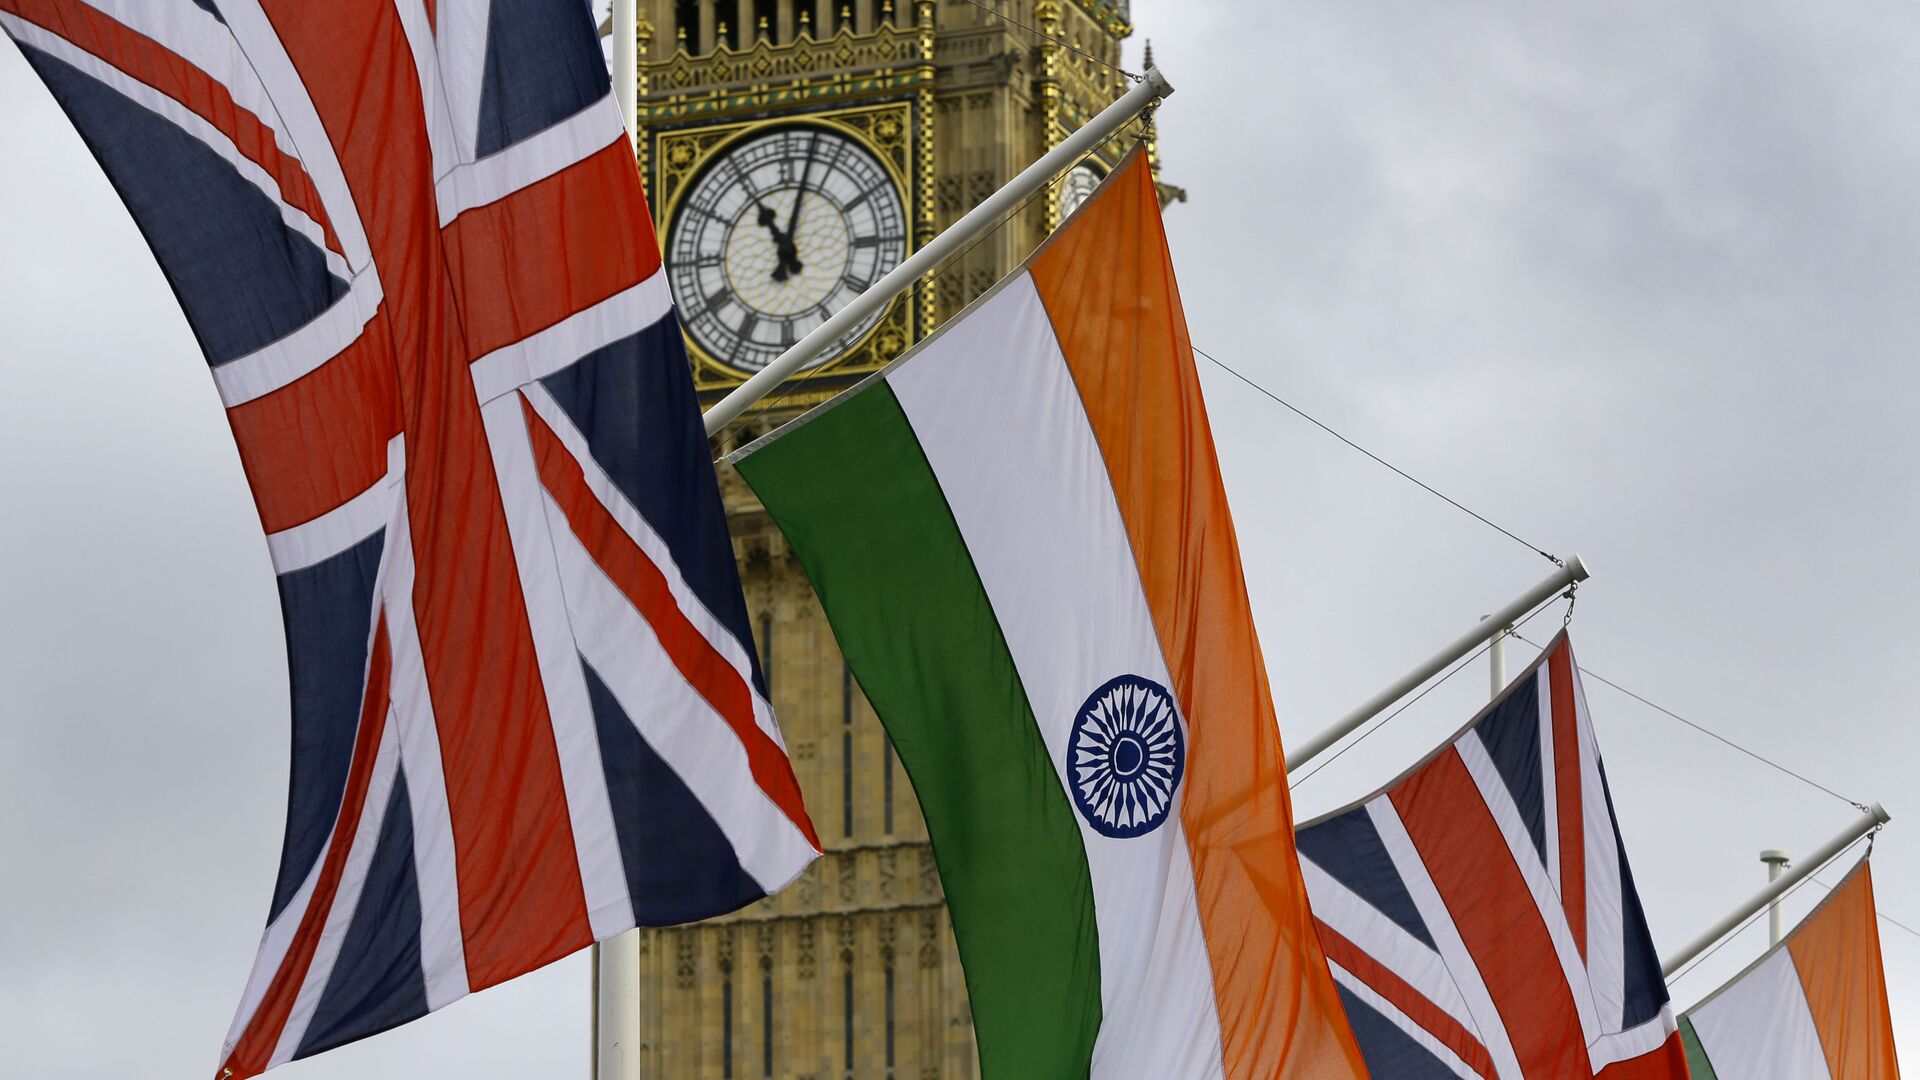 The Union and Indian flags hang near  the London landmark Big Ben  in Parliament Square in London, Thursday, Nov. 12, 2015. - Sputnik International, 1920, 02.01.2022